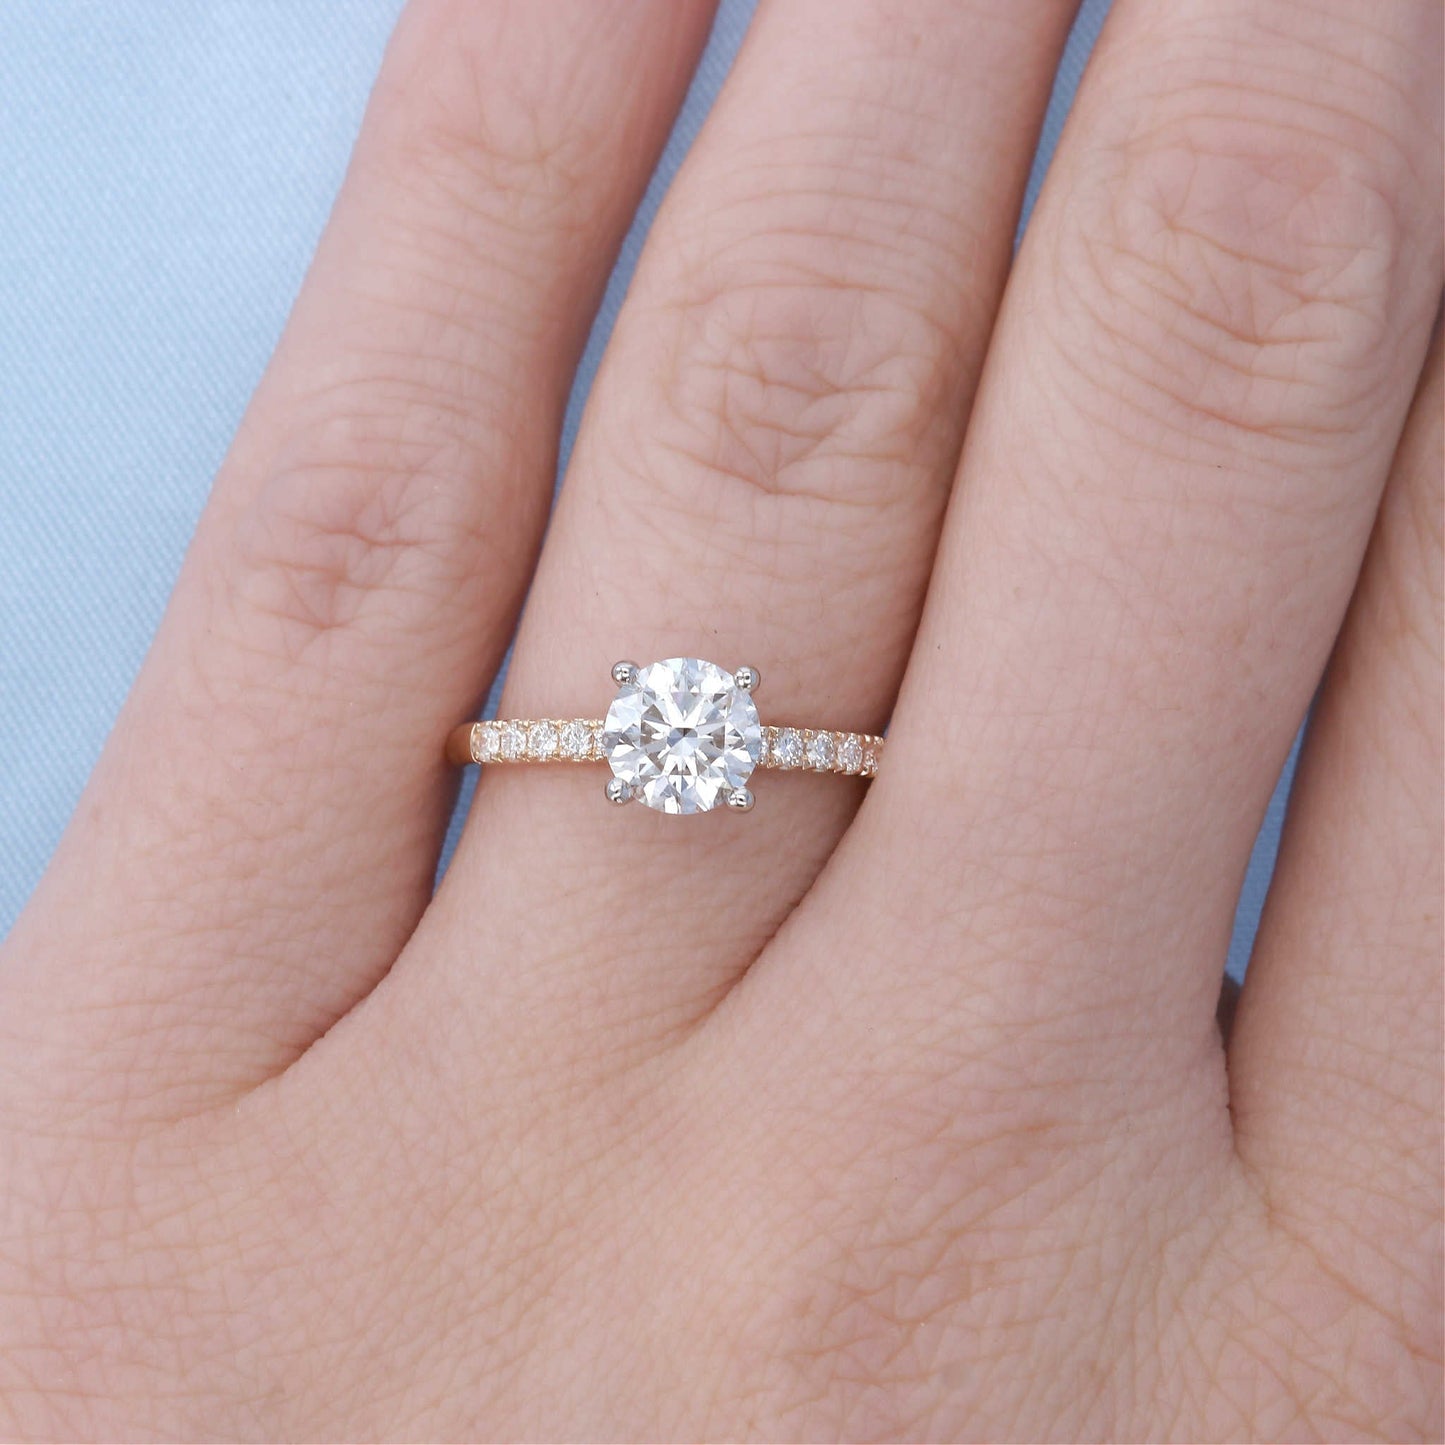 Two Tone Diamond Engagement Ring on a Finger